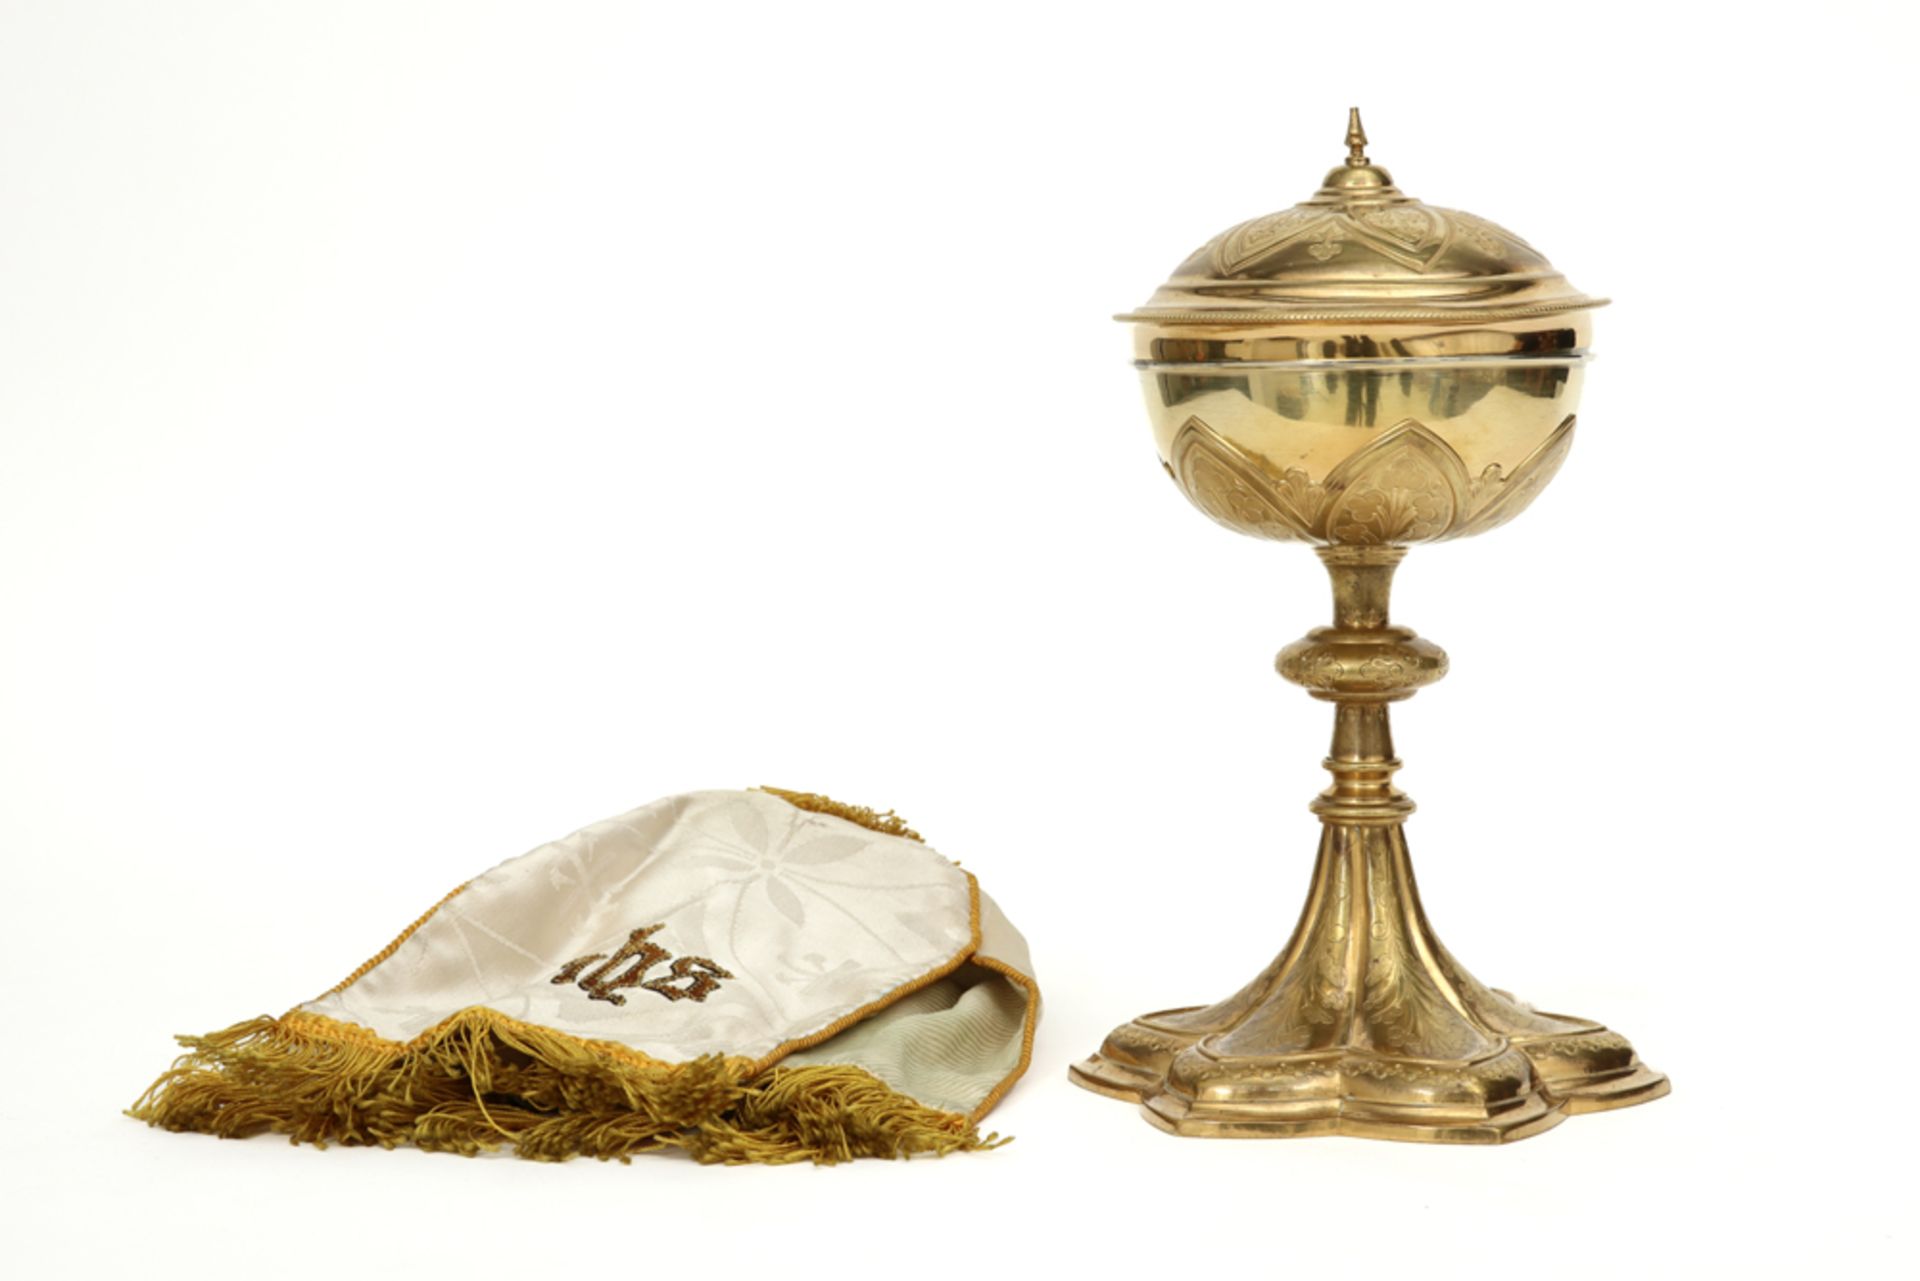 French chalice in marked gilded silver - with its cloth || Franse kelk in massief zilver (deels in